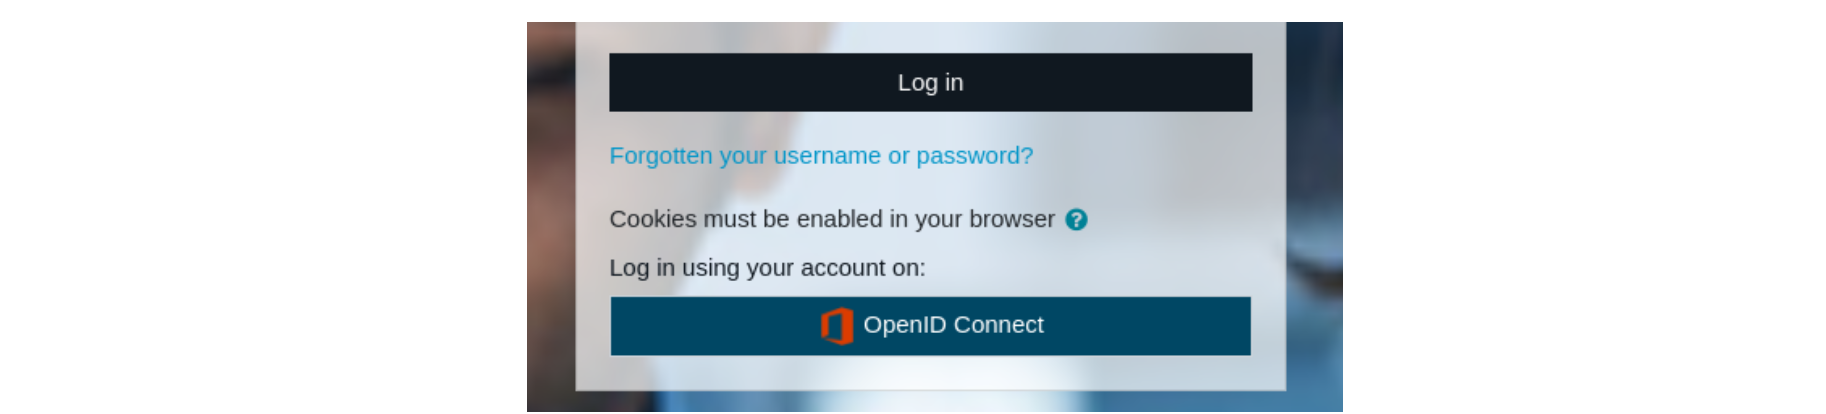 Moodle OpenID Connect authentication